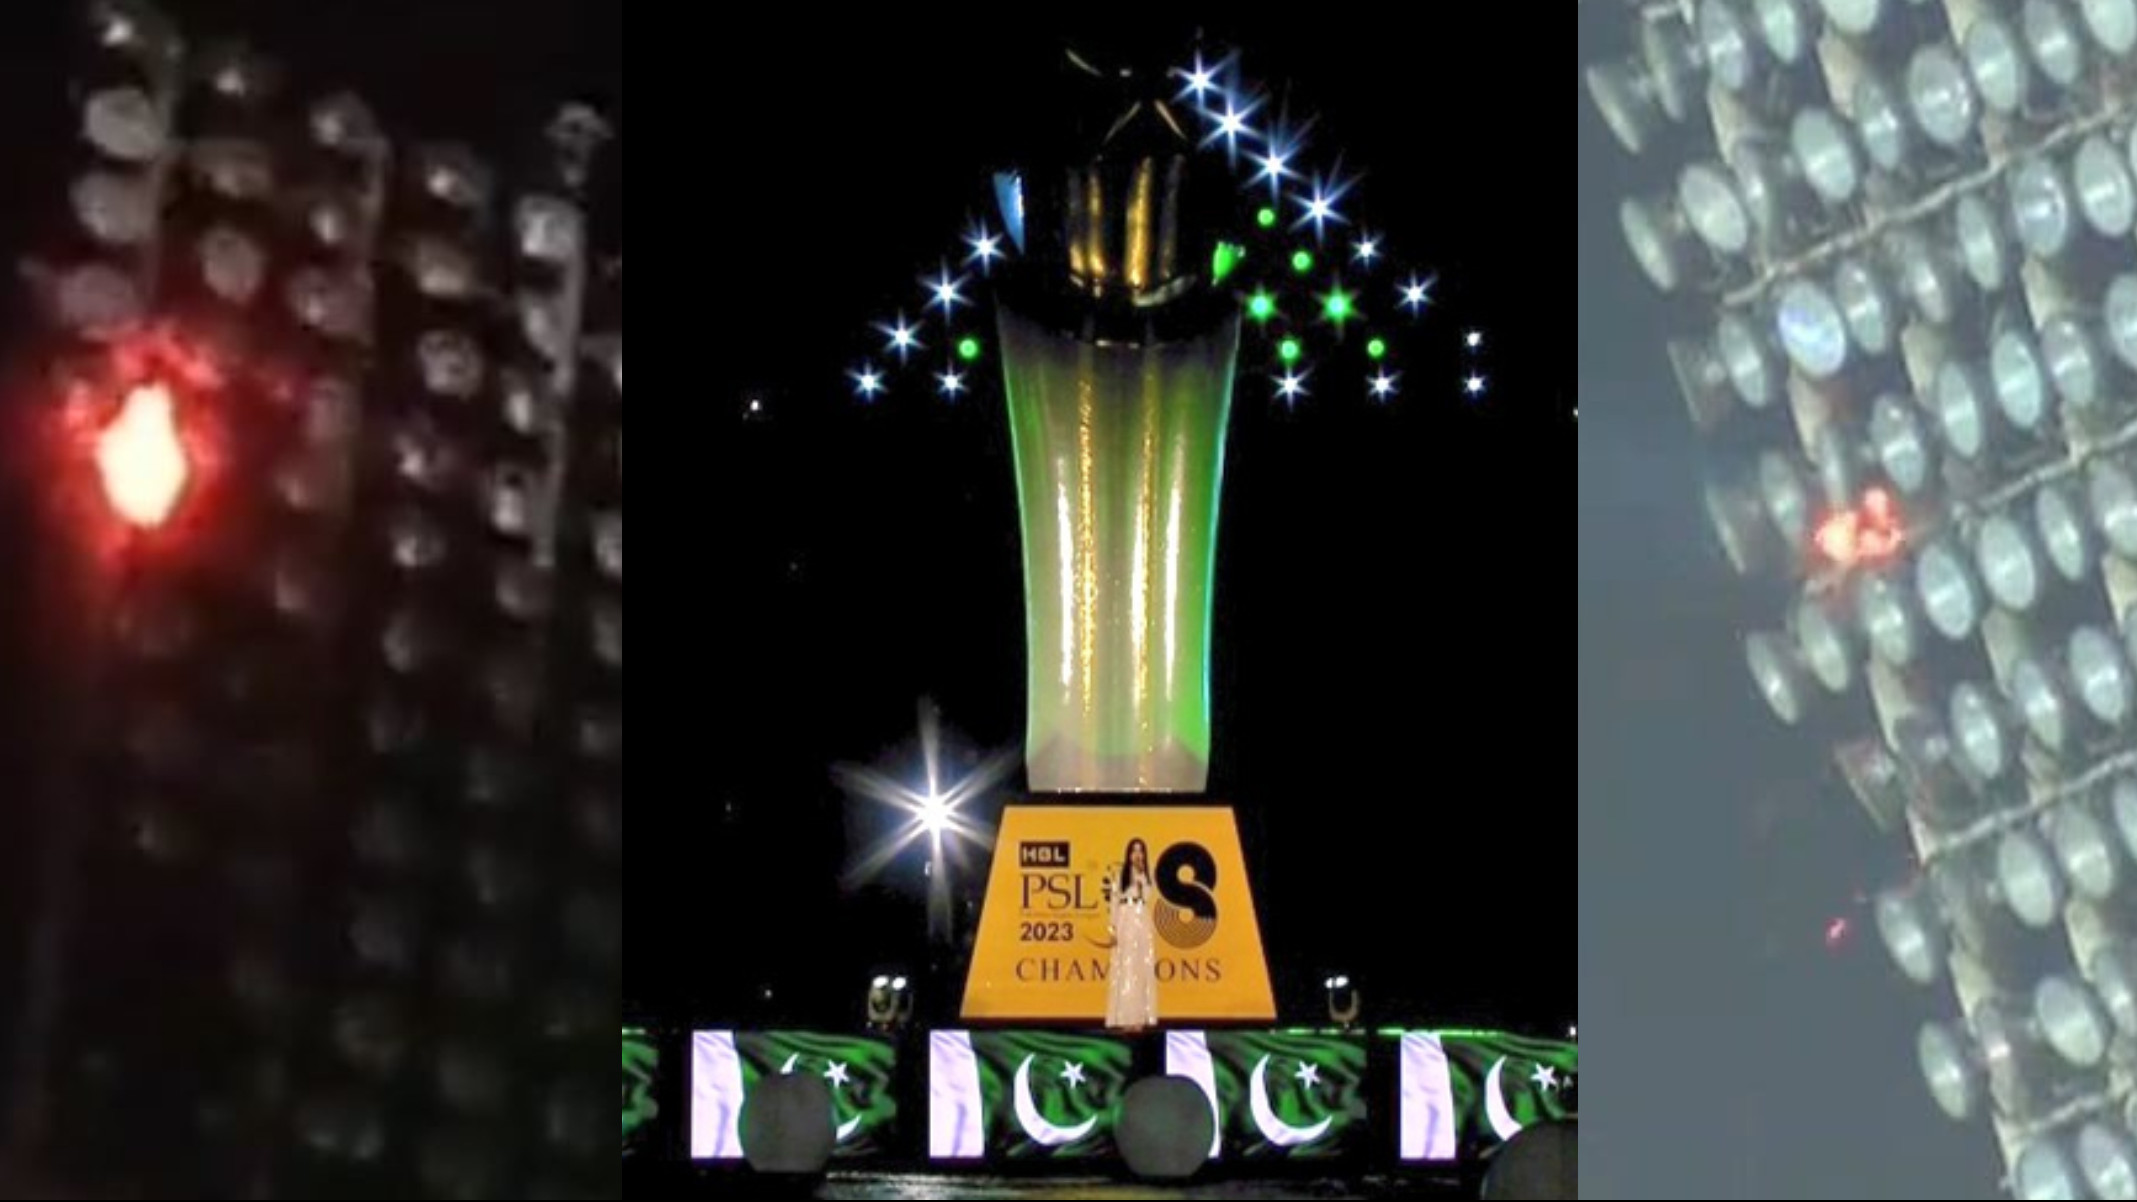 PSL 2023: WATCH- Floodlight tower catches fire due to fireworks during PSL 8 opening ceremony  